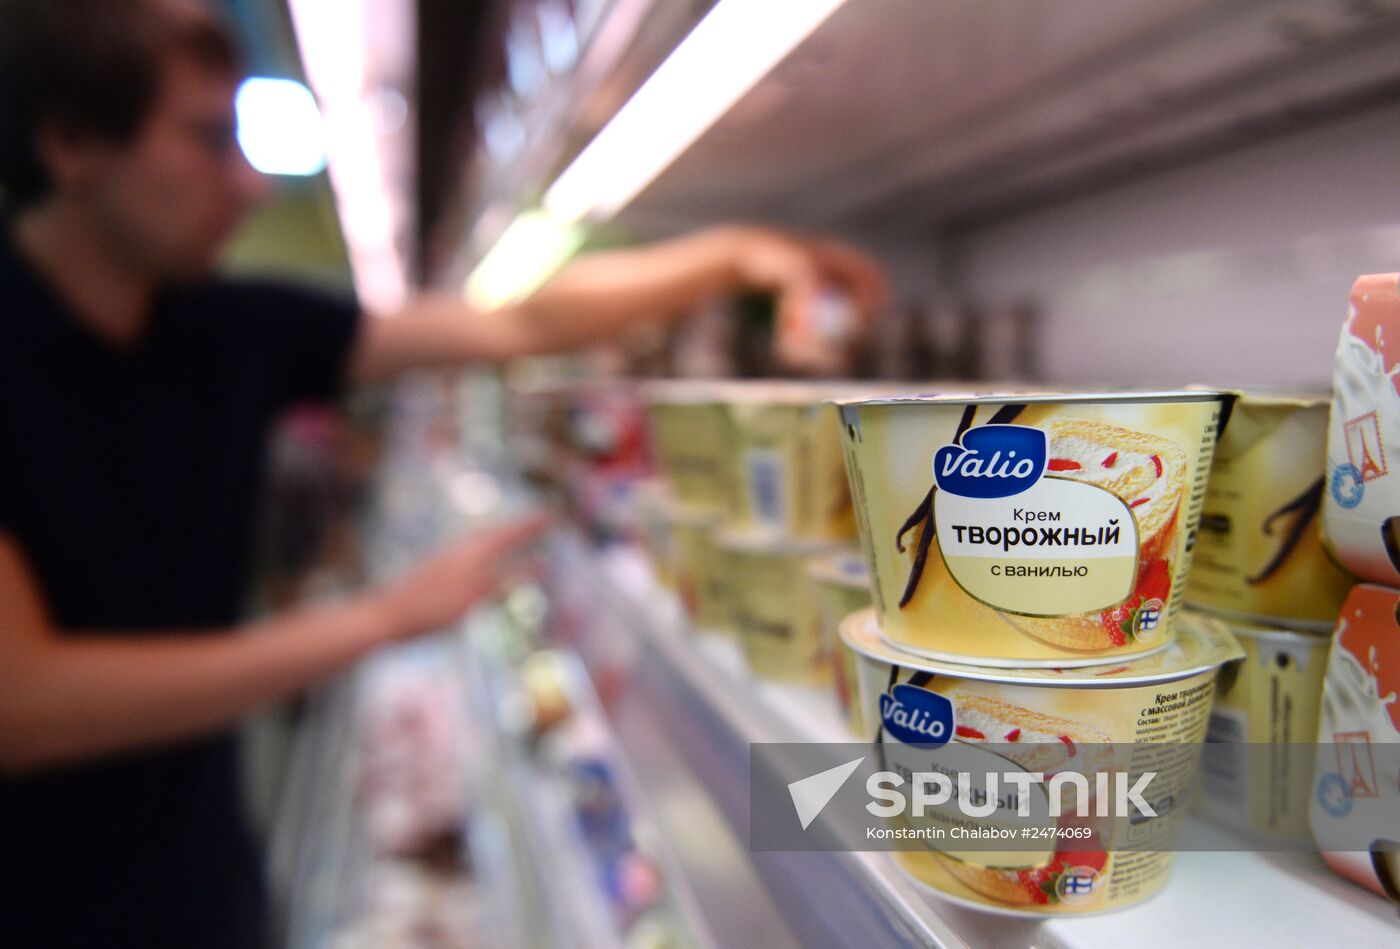 Valio Finnish dairy producer's products on sale